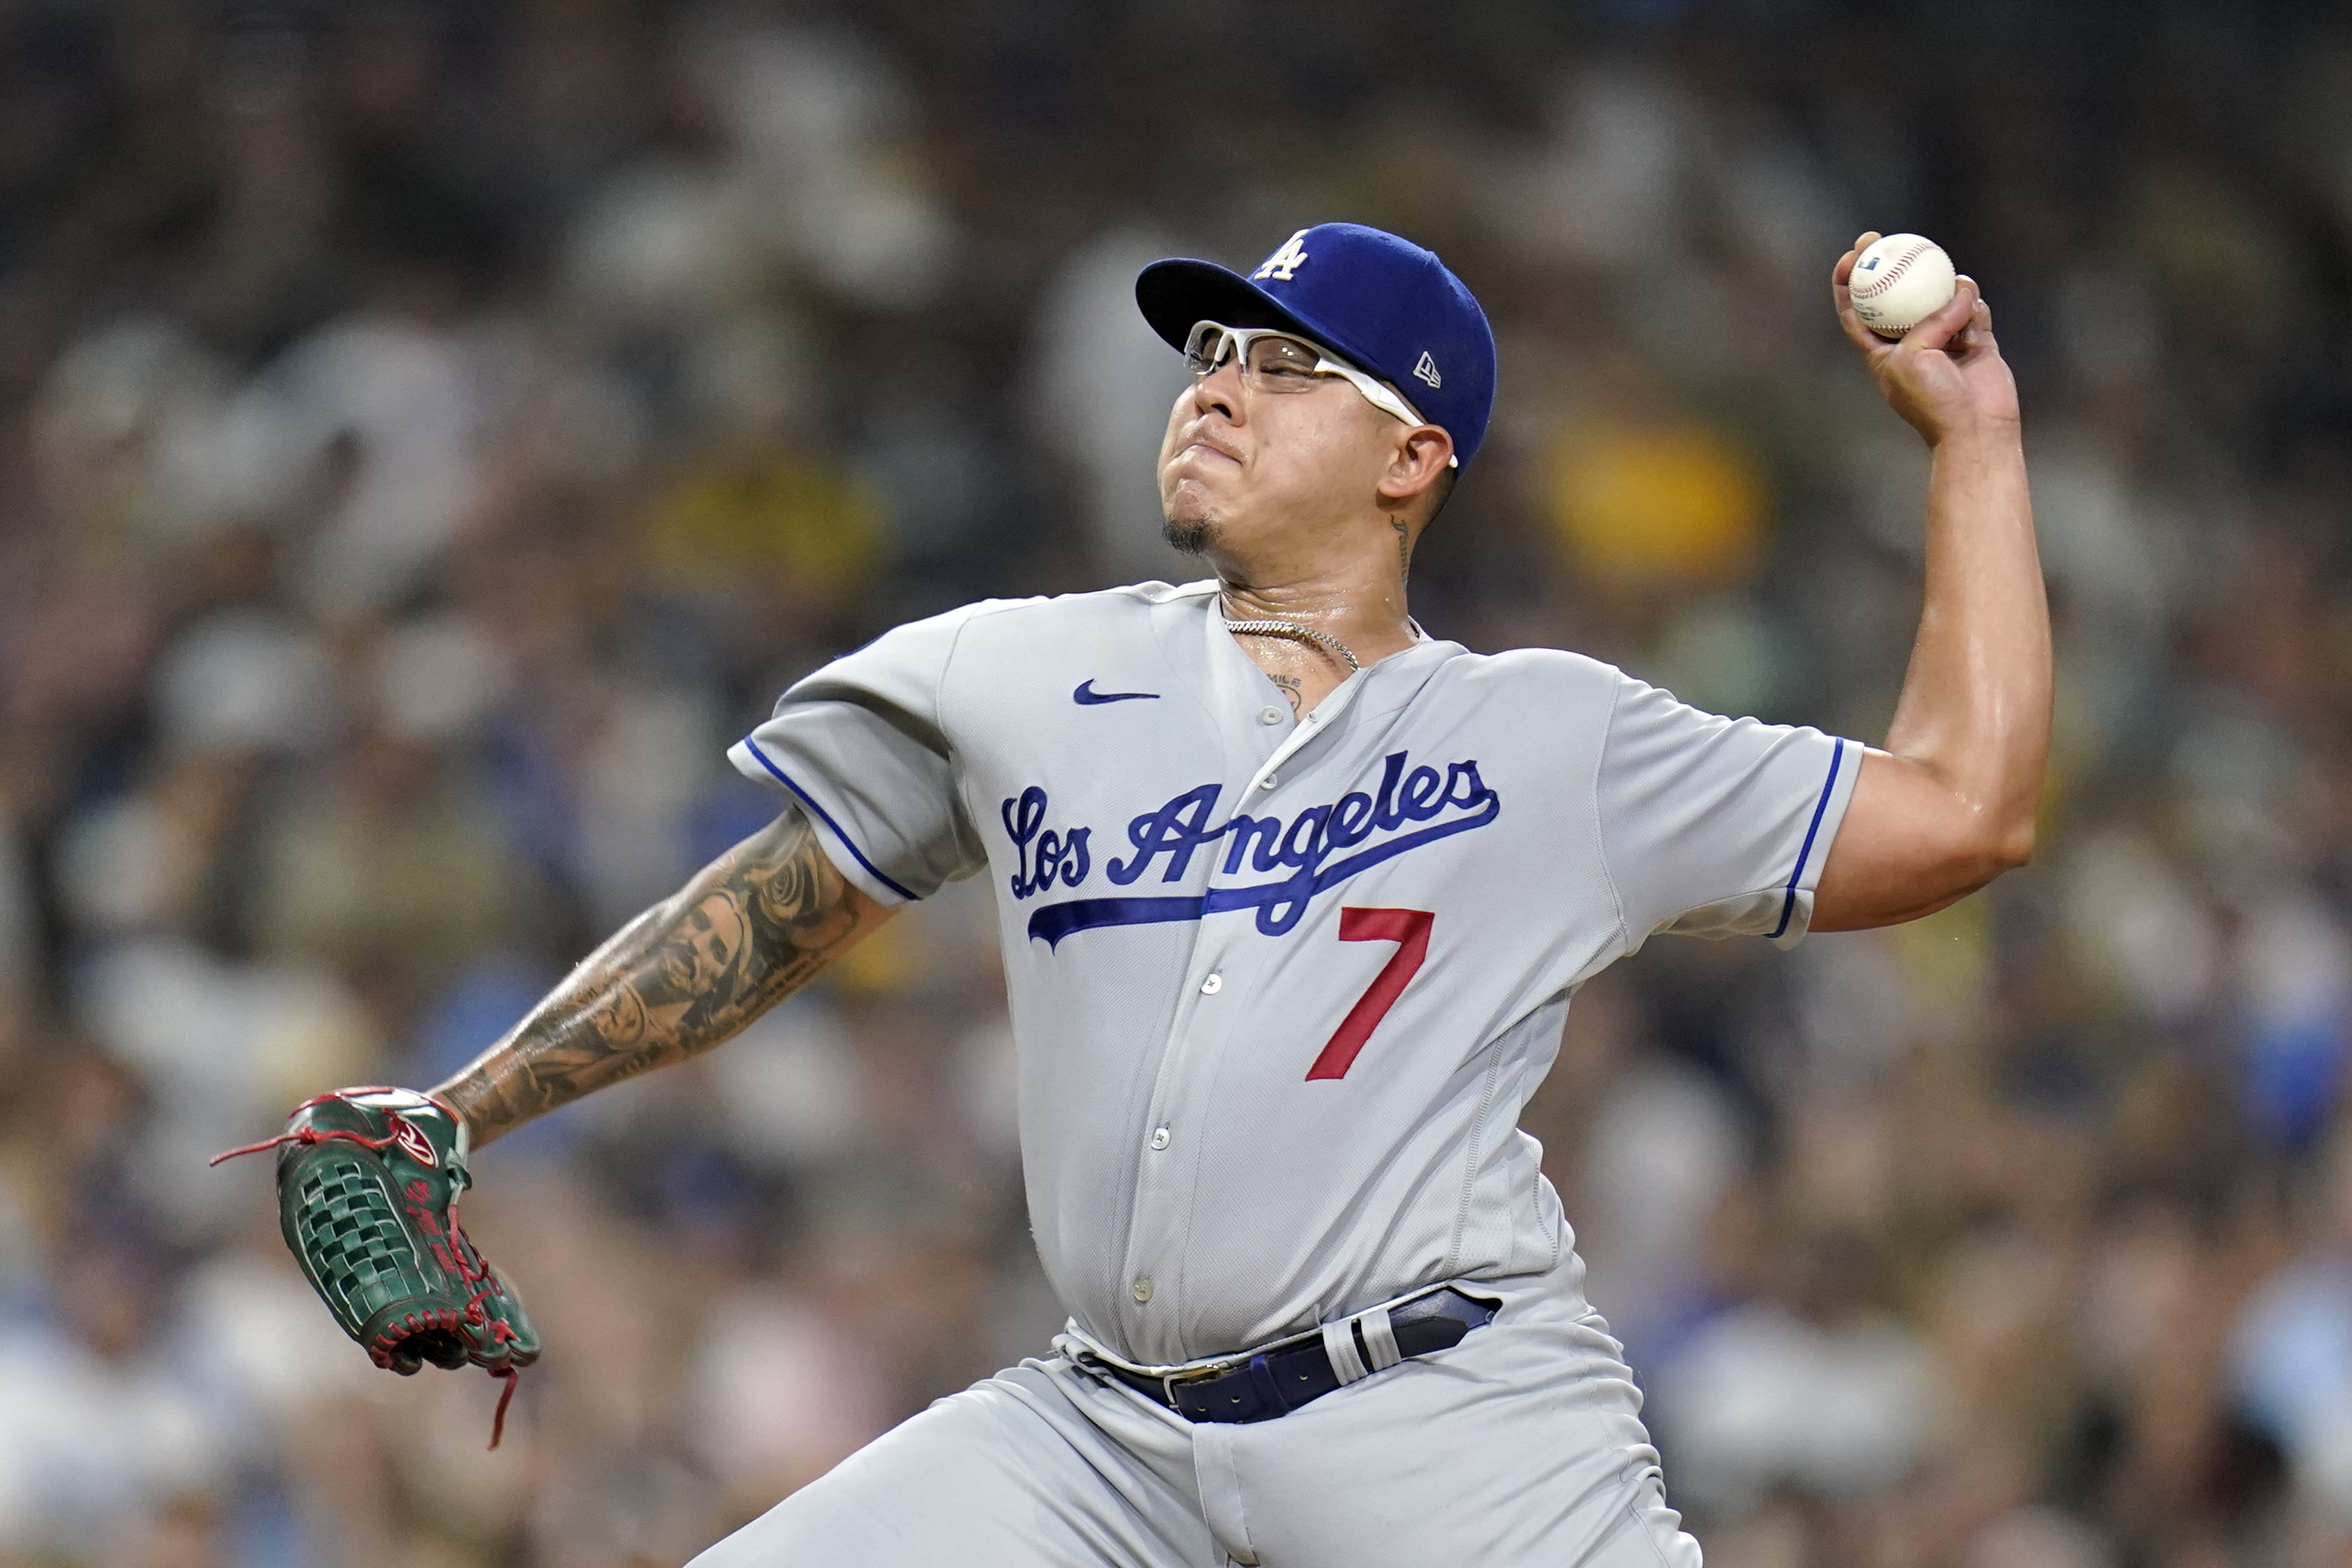 Freeman has RBI single in 10th, gives Dodgers 107th win